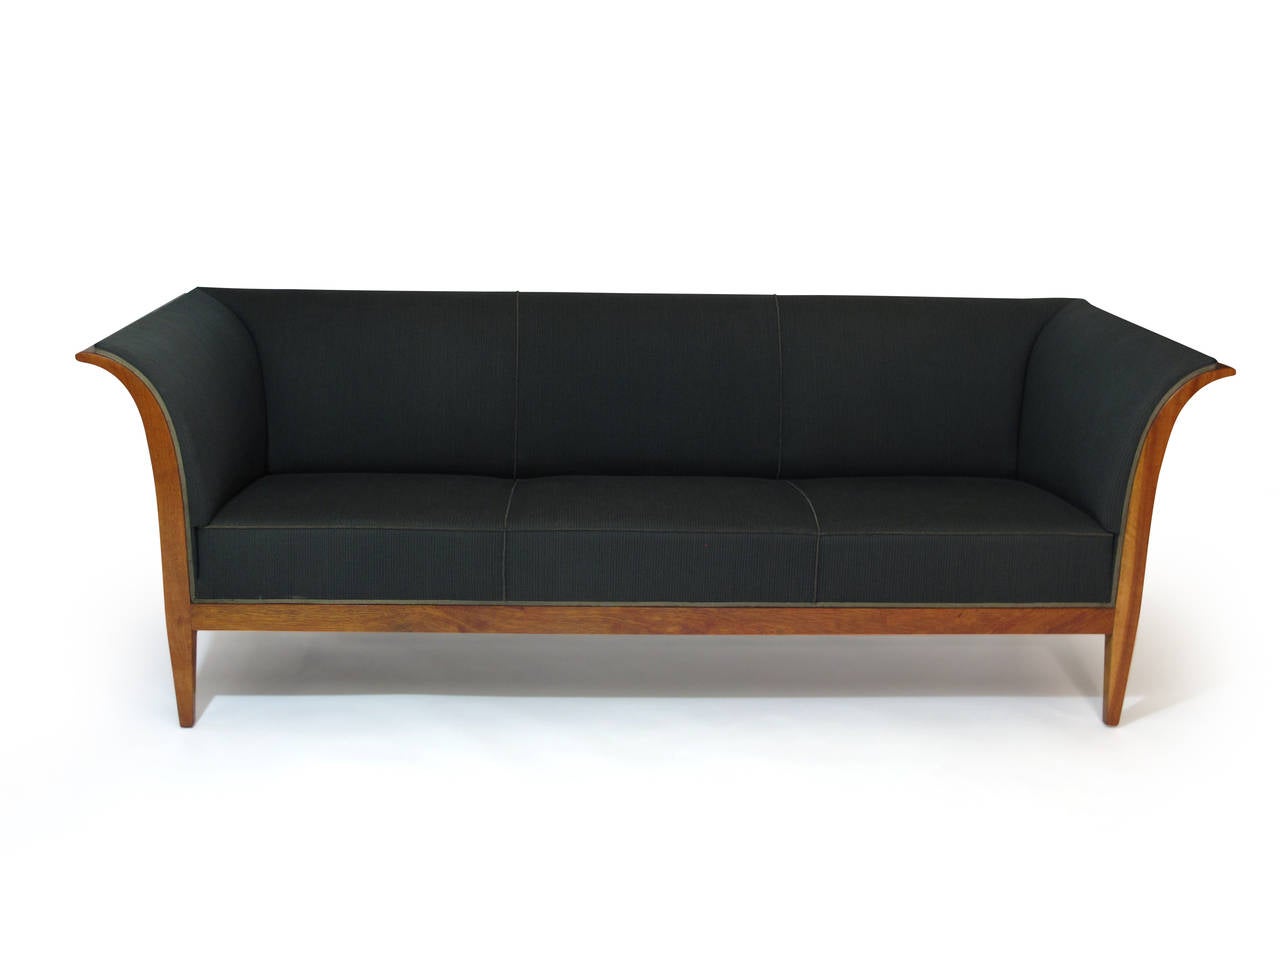 Elegant sofa by master cabinetmaker Frits Henningsen. Flared arms of Cuban mahogany, upholstered in the original wool fabric with horsehair padding.